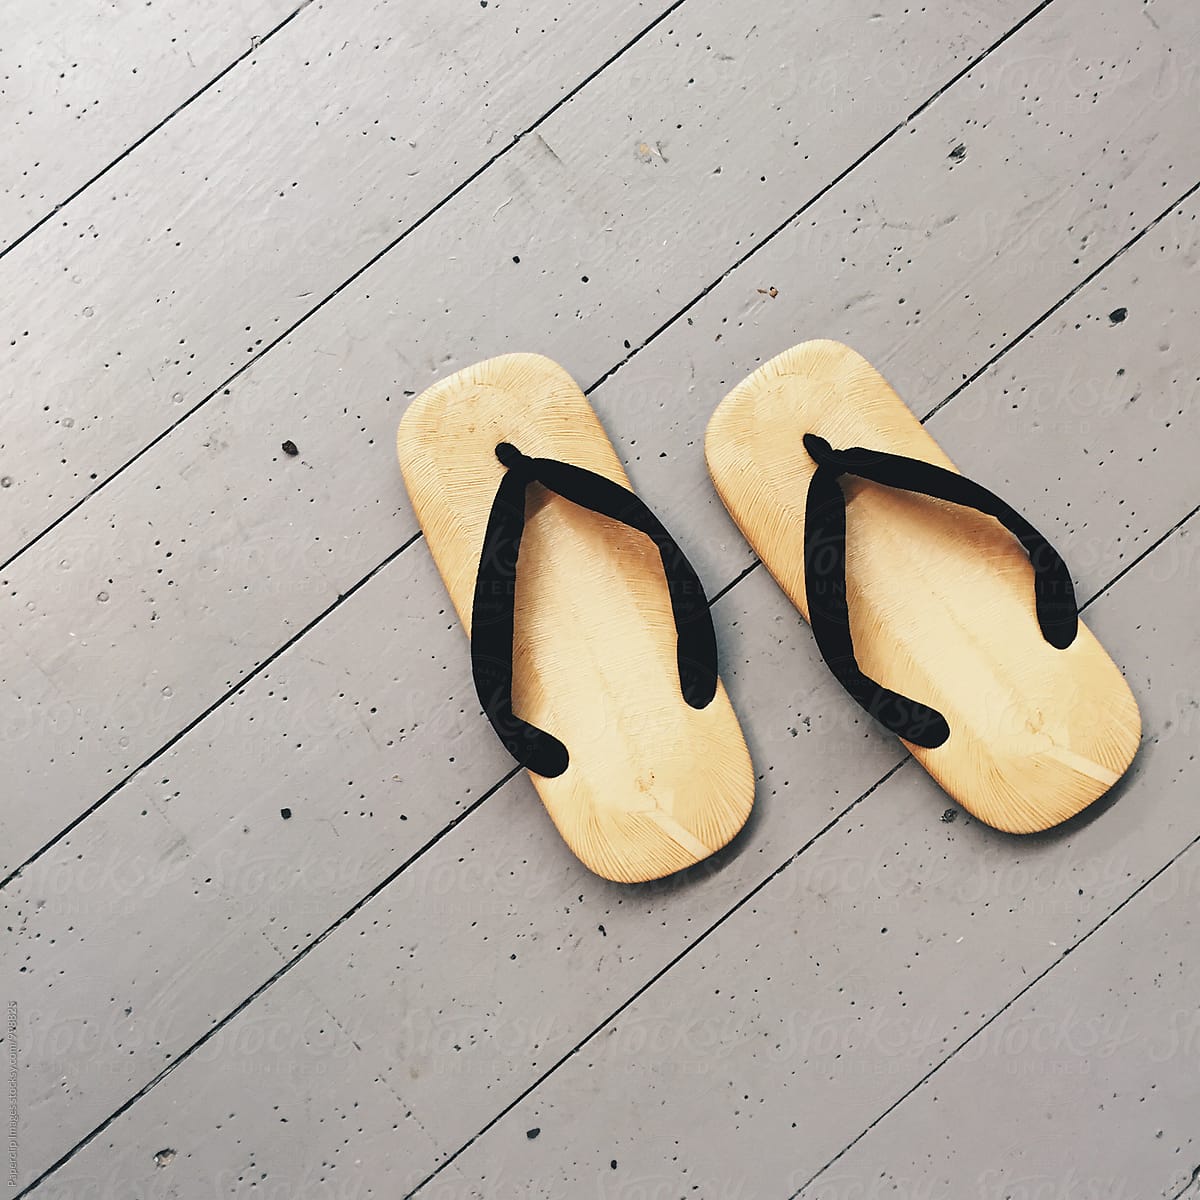 Buy Ecoman wooden slippers & flip - flop (Black, numeric_8) at Amazon.in-thanhphatduhoc.com.vn